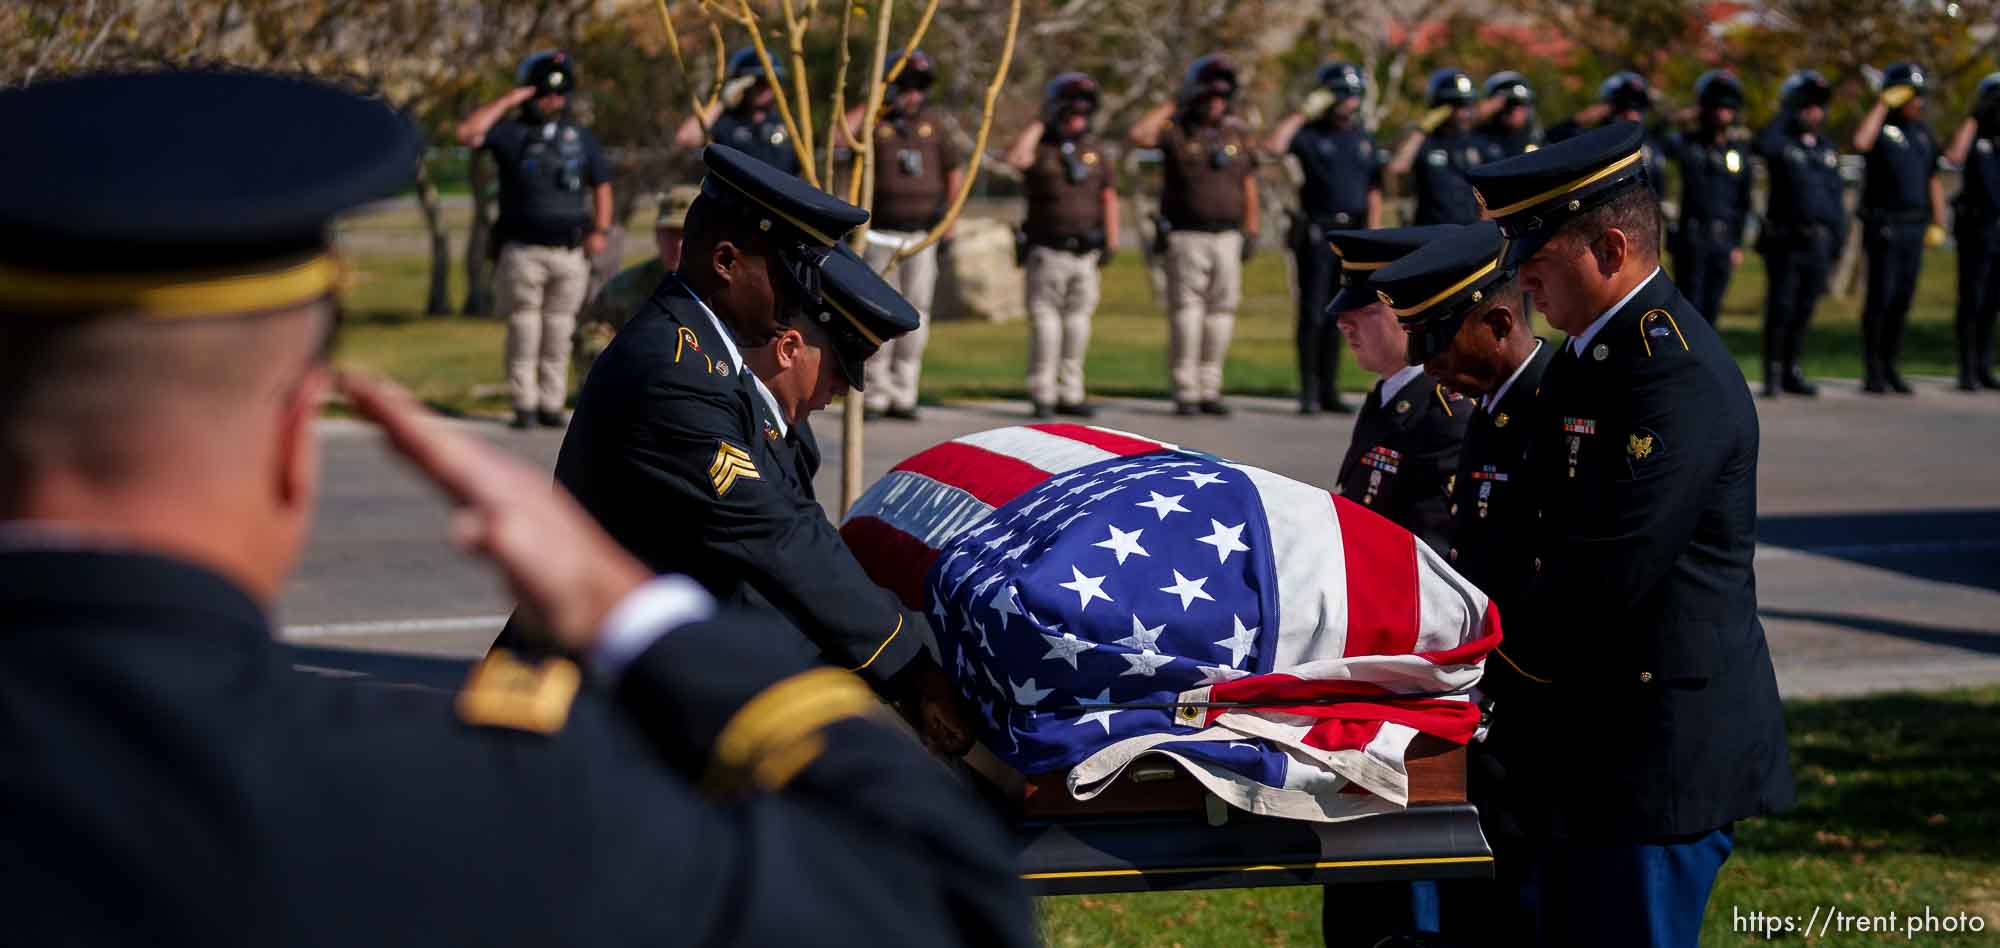 Sgt. Elvin Lee Phillips, killed in WW2, finally laid to rest